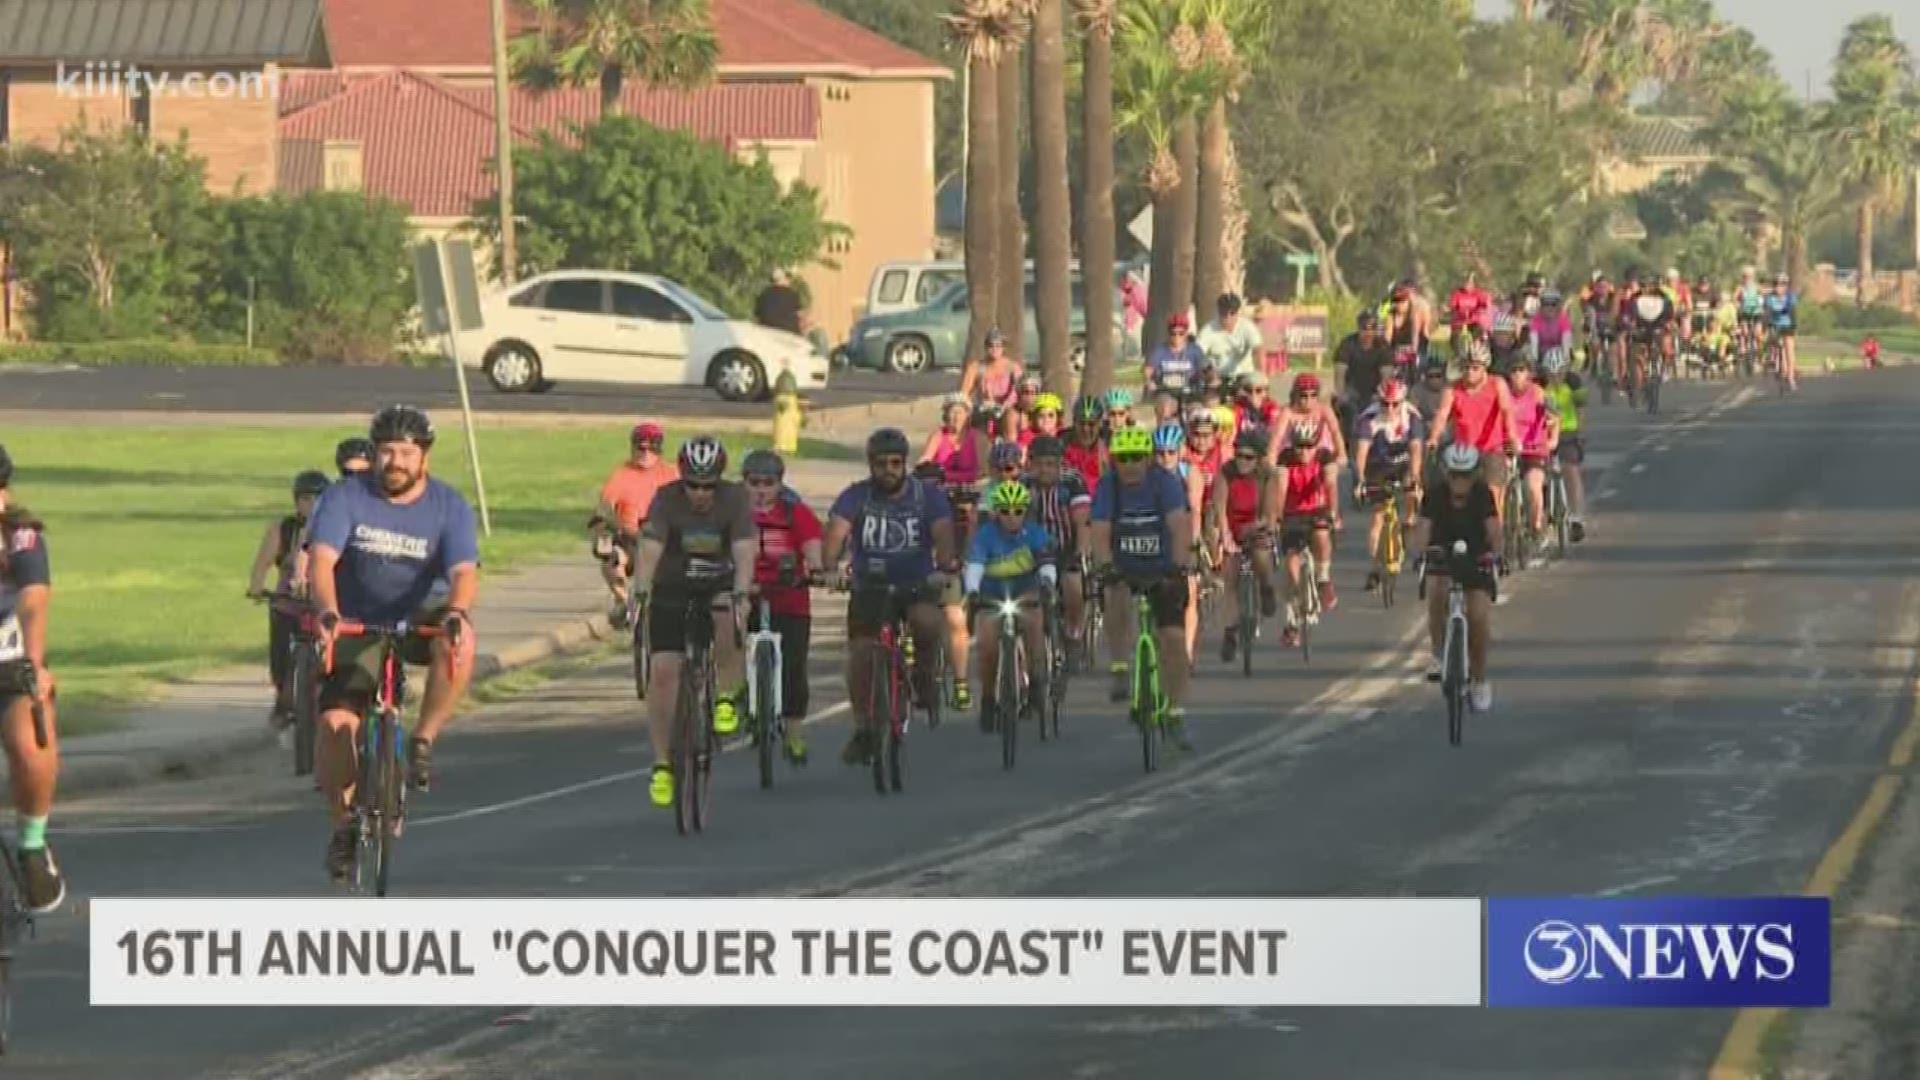 Thousands ride in 16th Annual Conquer the Coast event